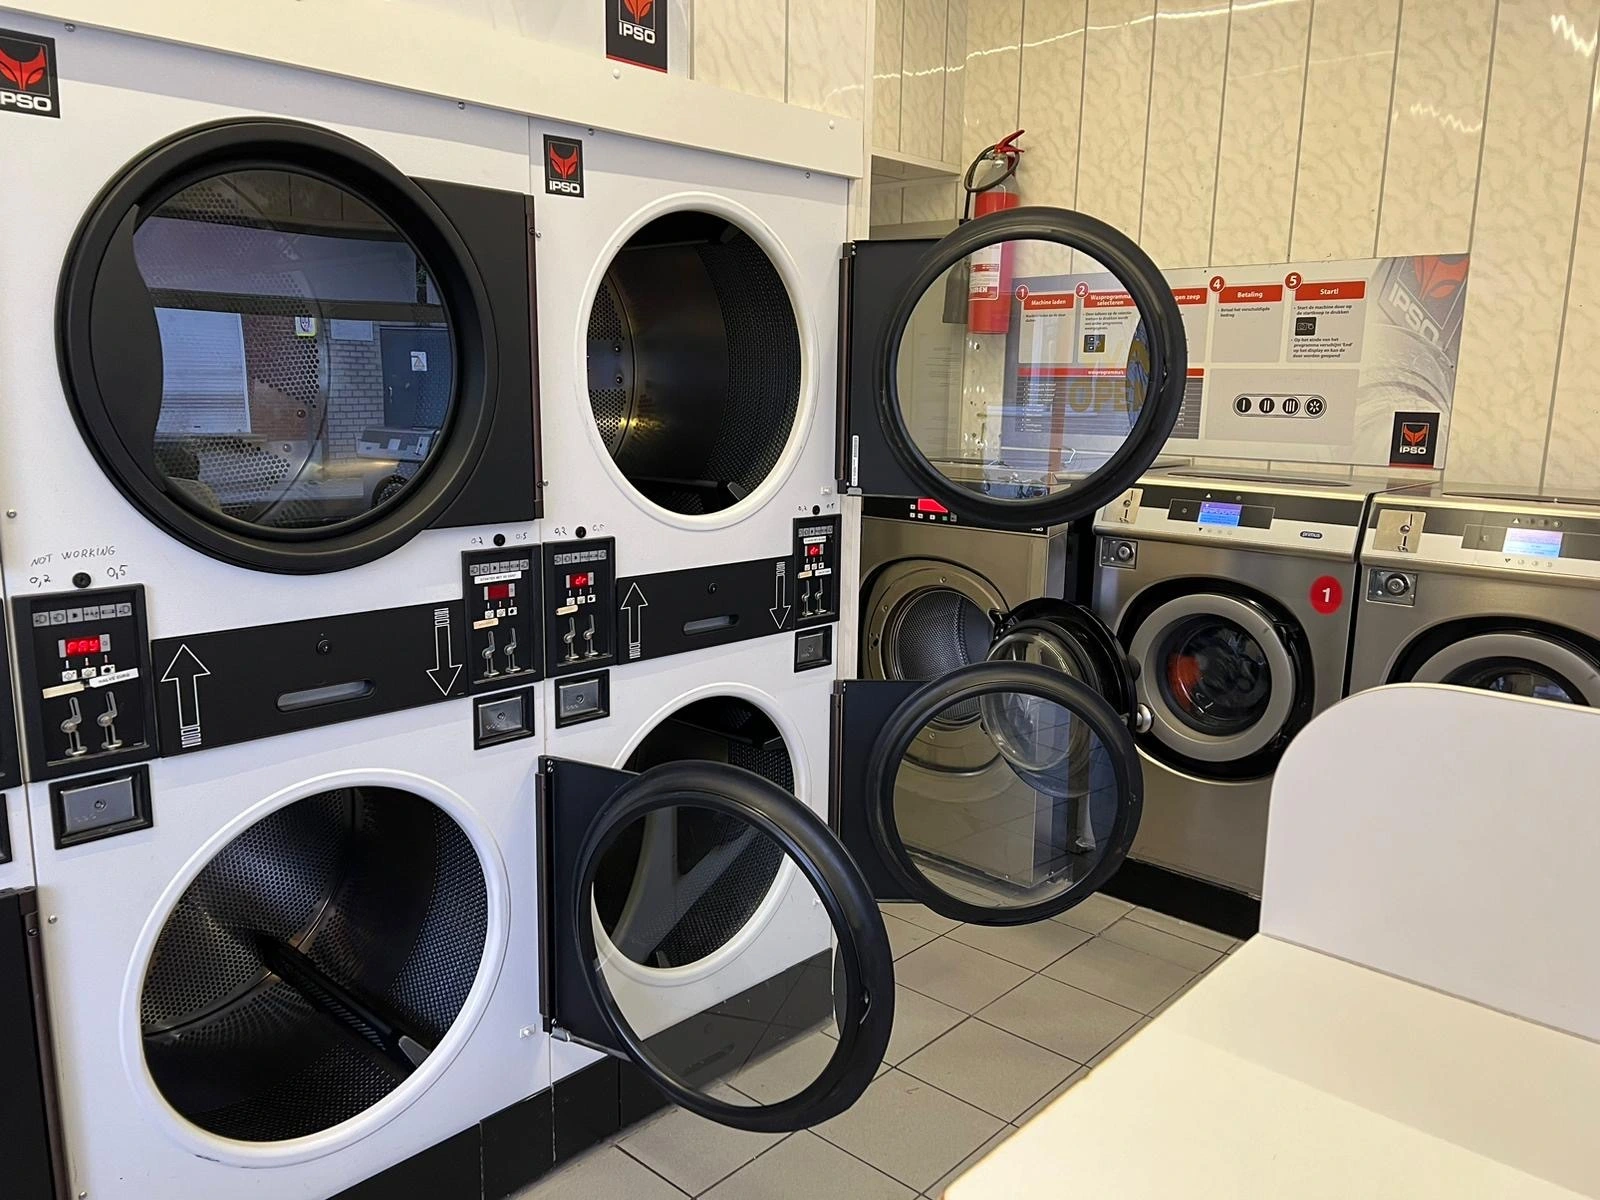 A laundromat with several washing machines and a folding table